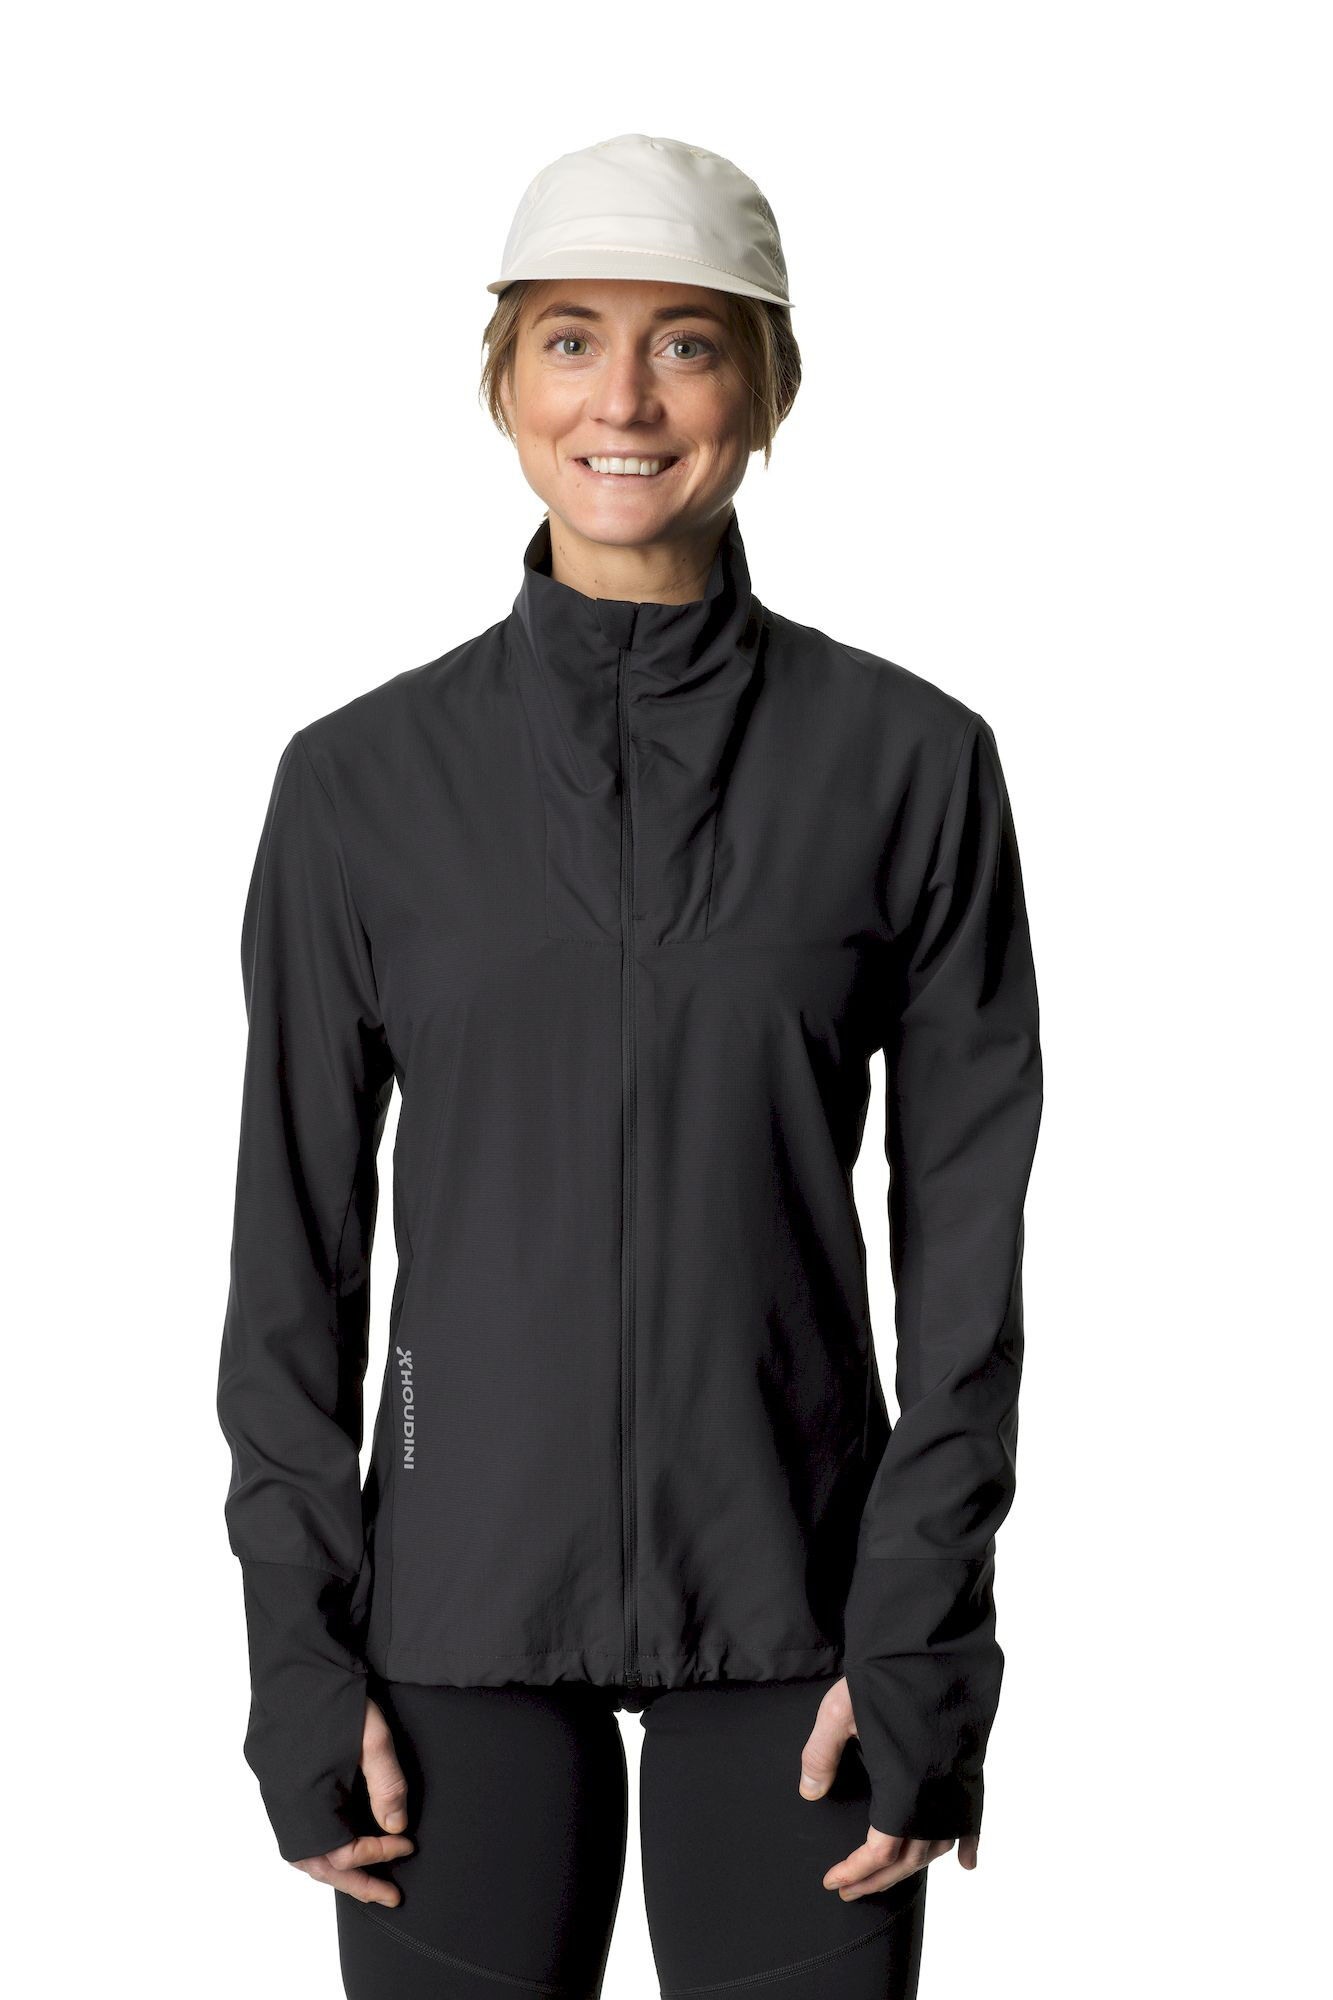 Houdini Sportswear Pace Wind Jacket - Giacca a vento - Donna | Hardloop